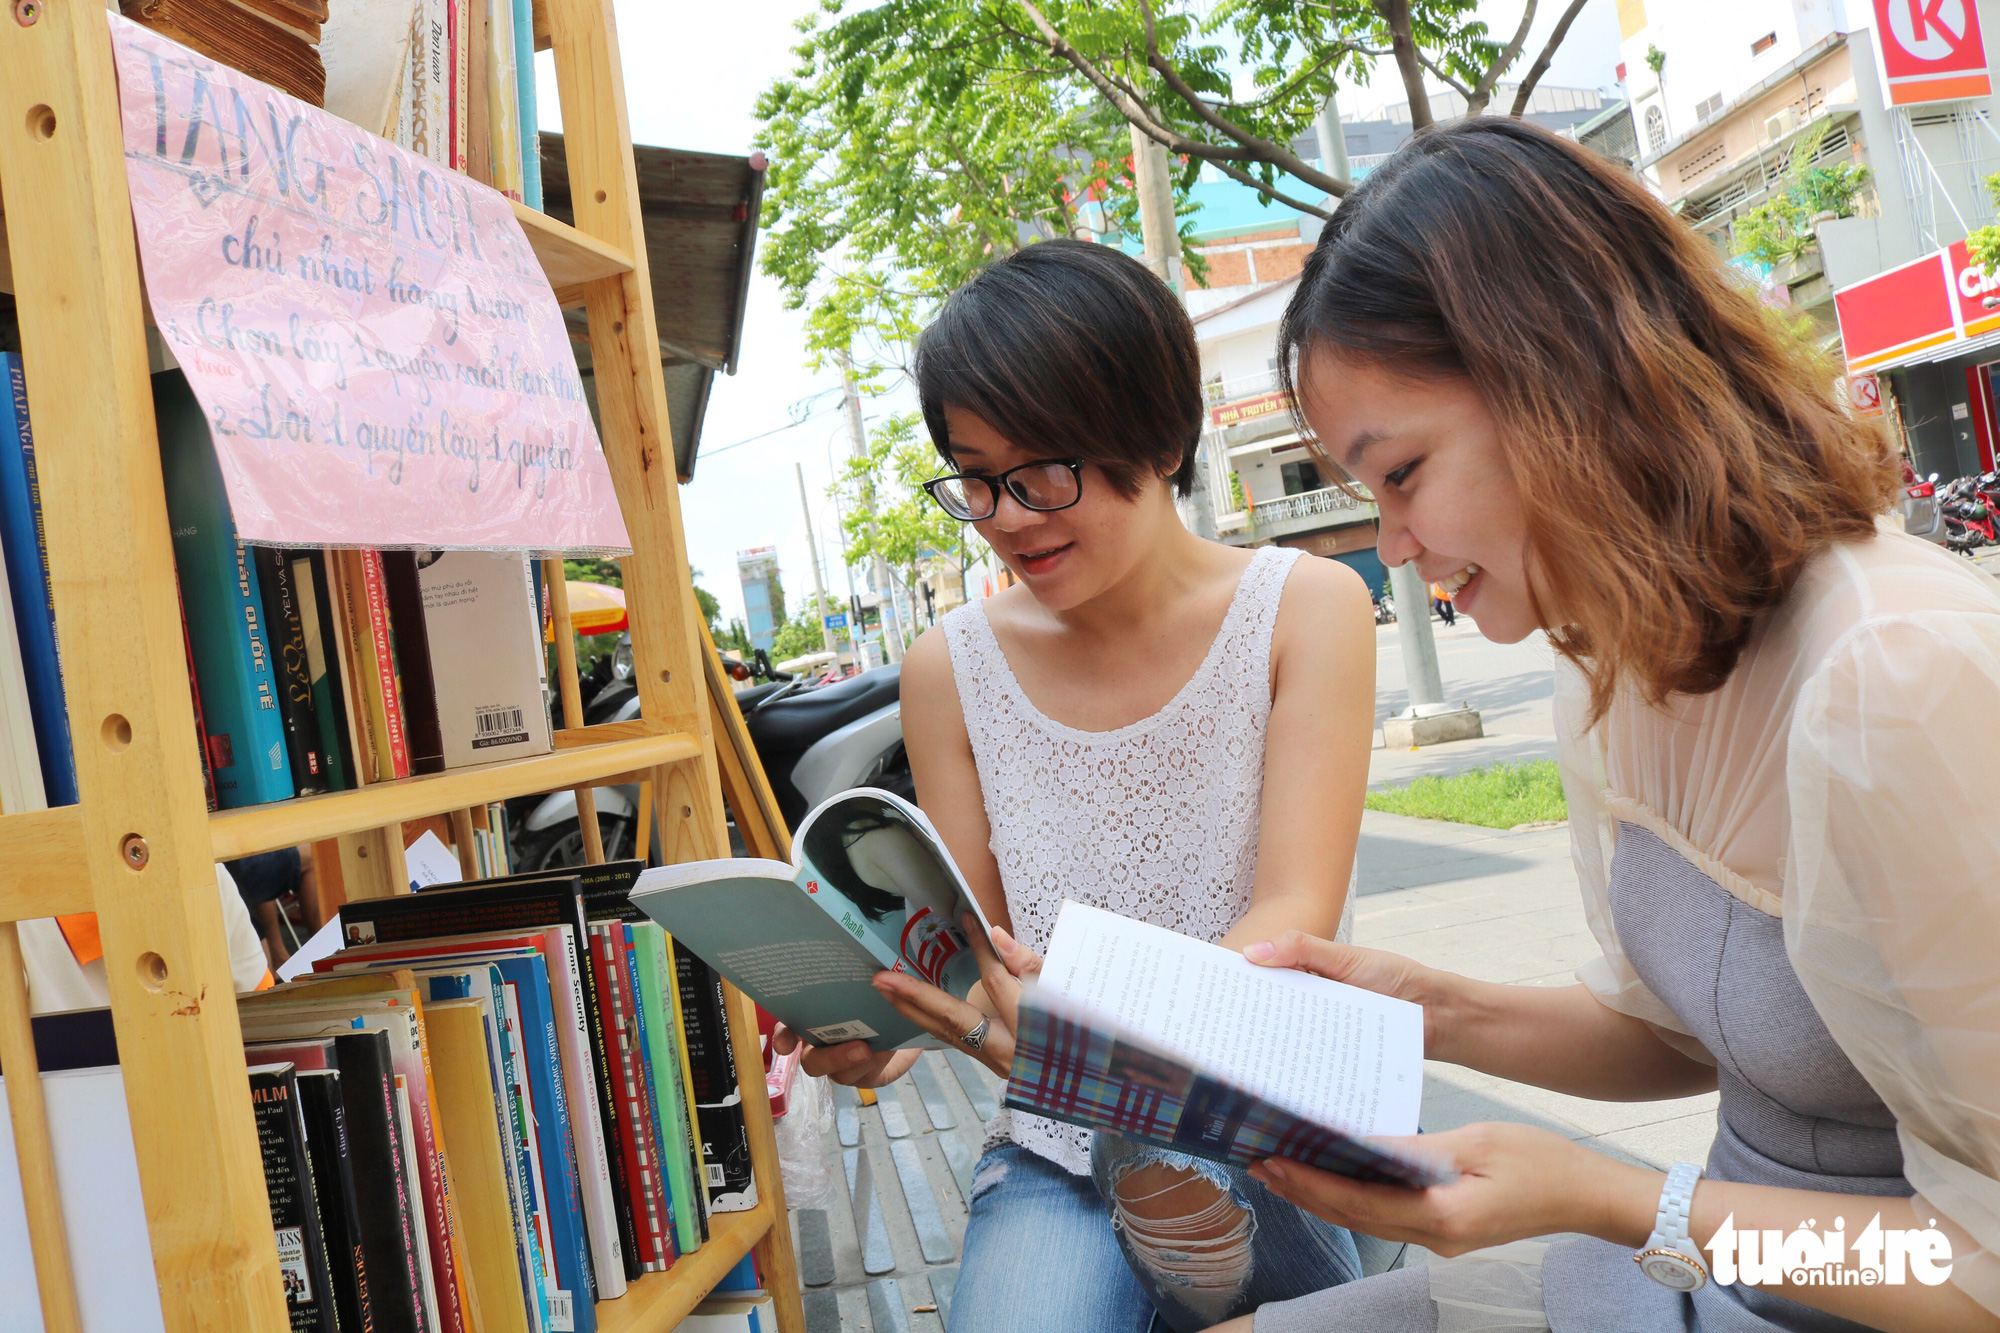 Saigon café allows customers to pay for drinks with books